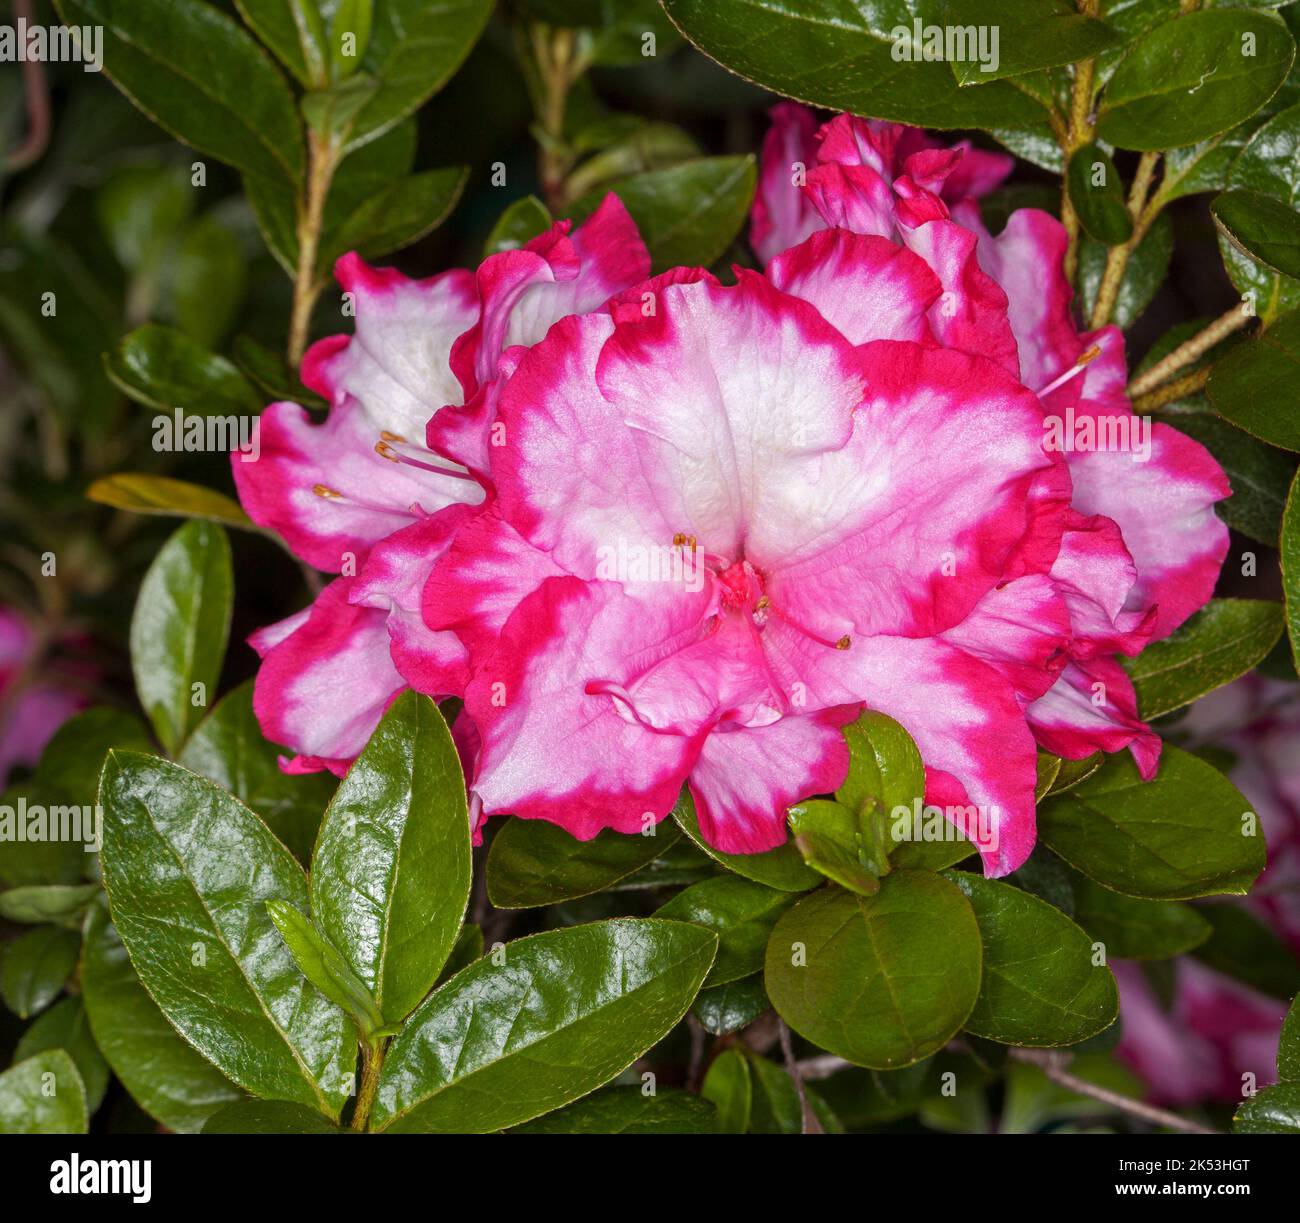 Cluster of spectacular bright pink and white flowers of Azalea indica 'Gay Paree' on background of vivid green leaves, in Australia Stock Photo